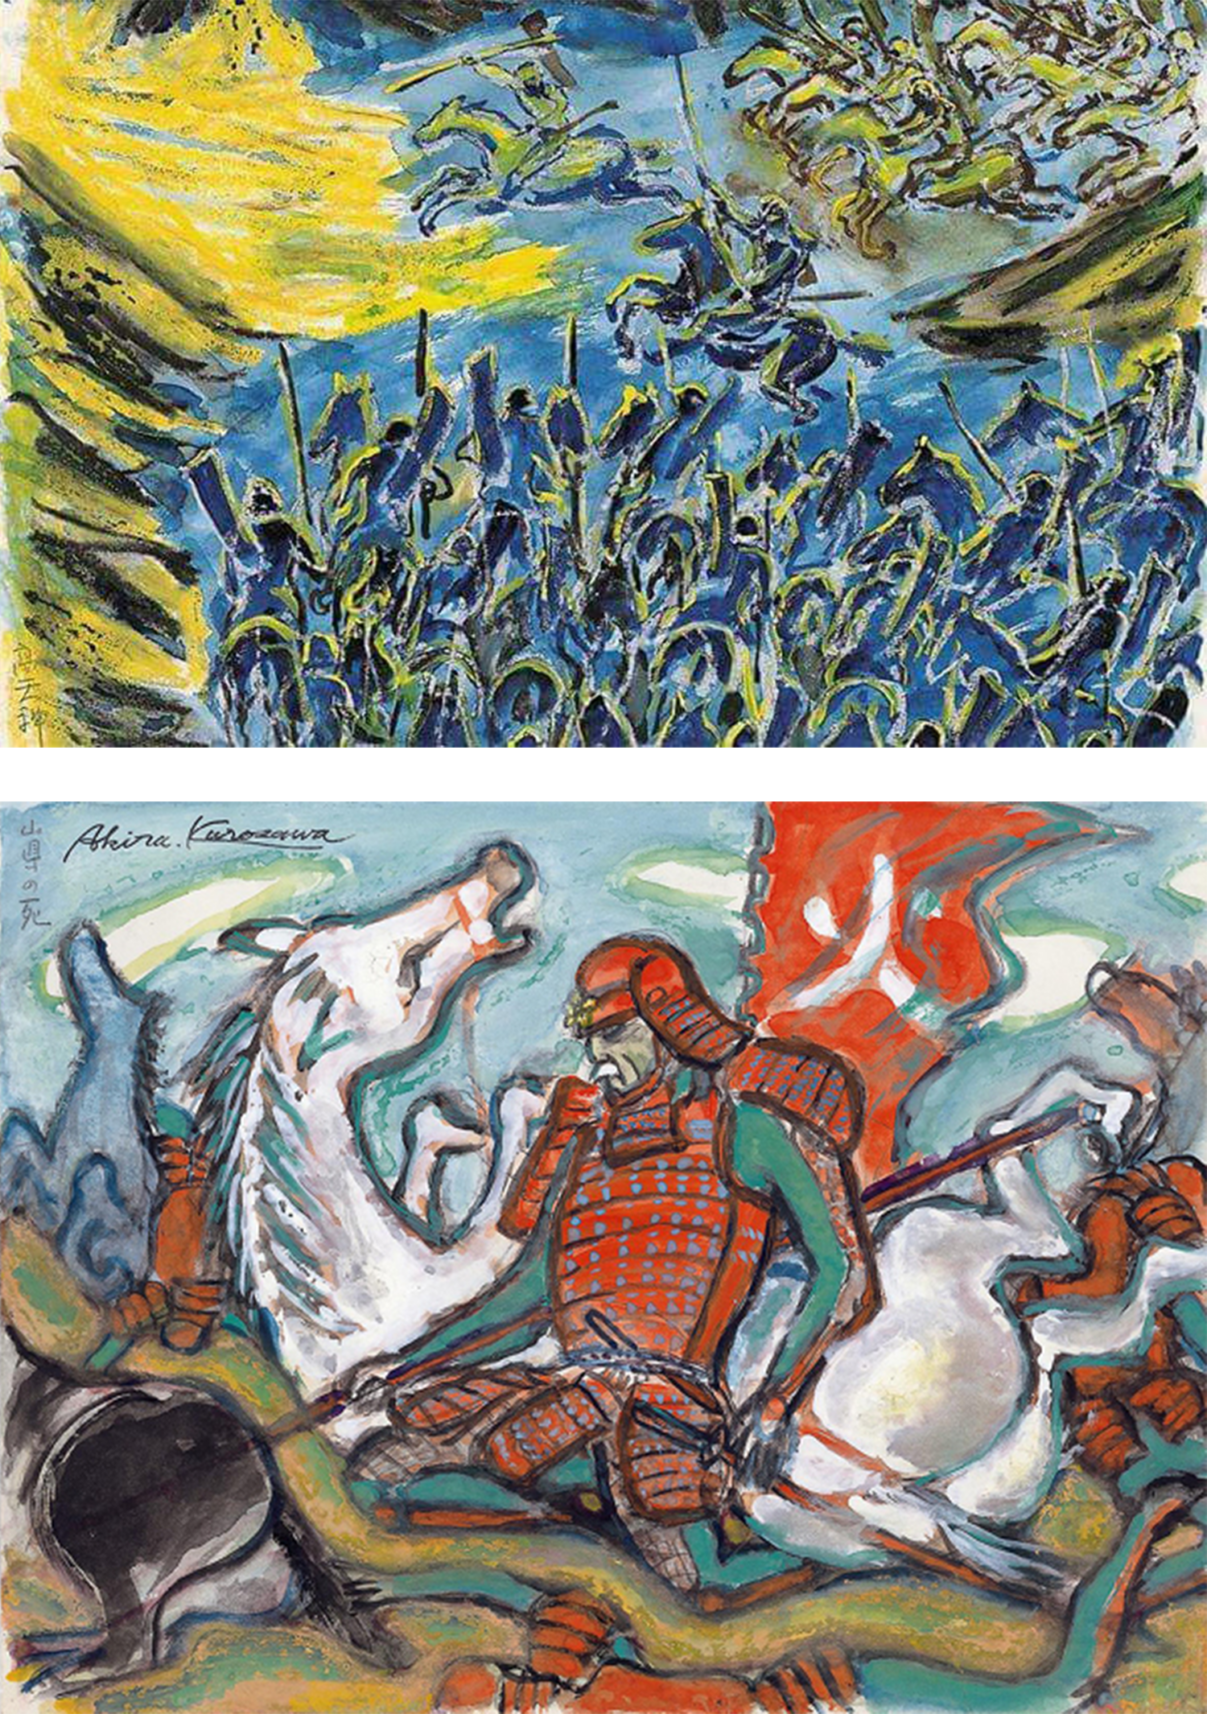 two stacked images, one blue and yellow depicting a calvary, the other depicting a samurai in bright red and teal fallen from a white horse